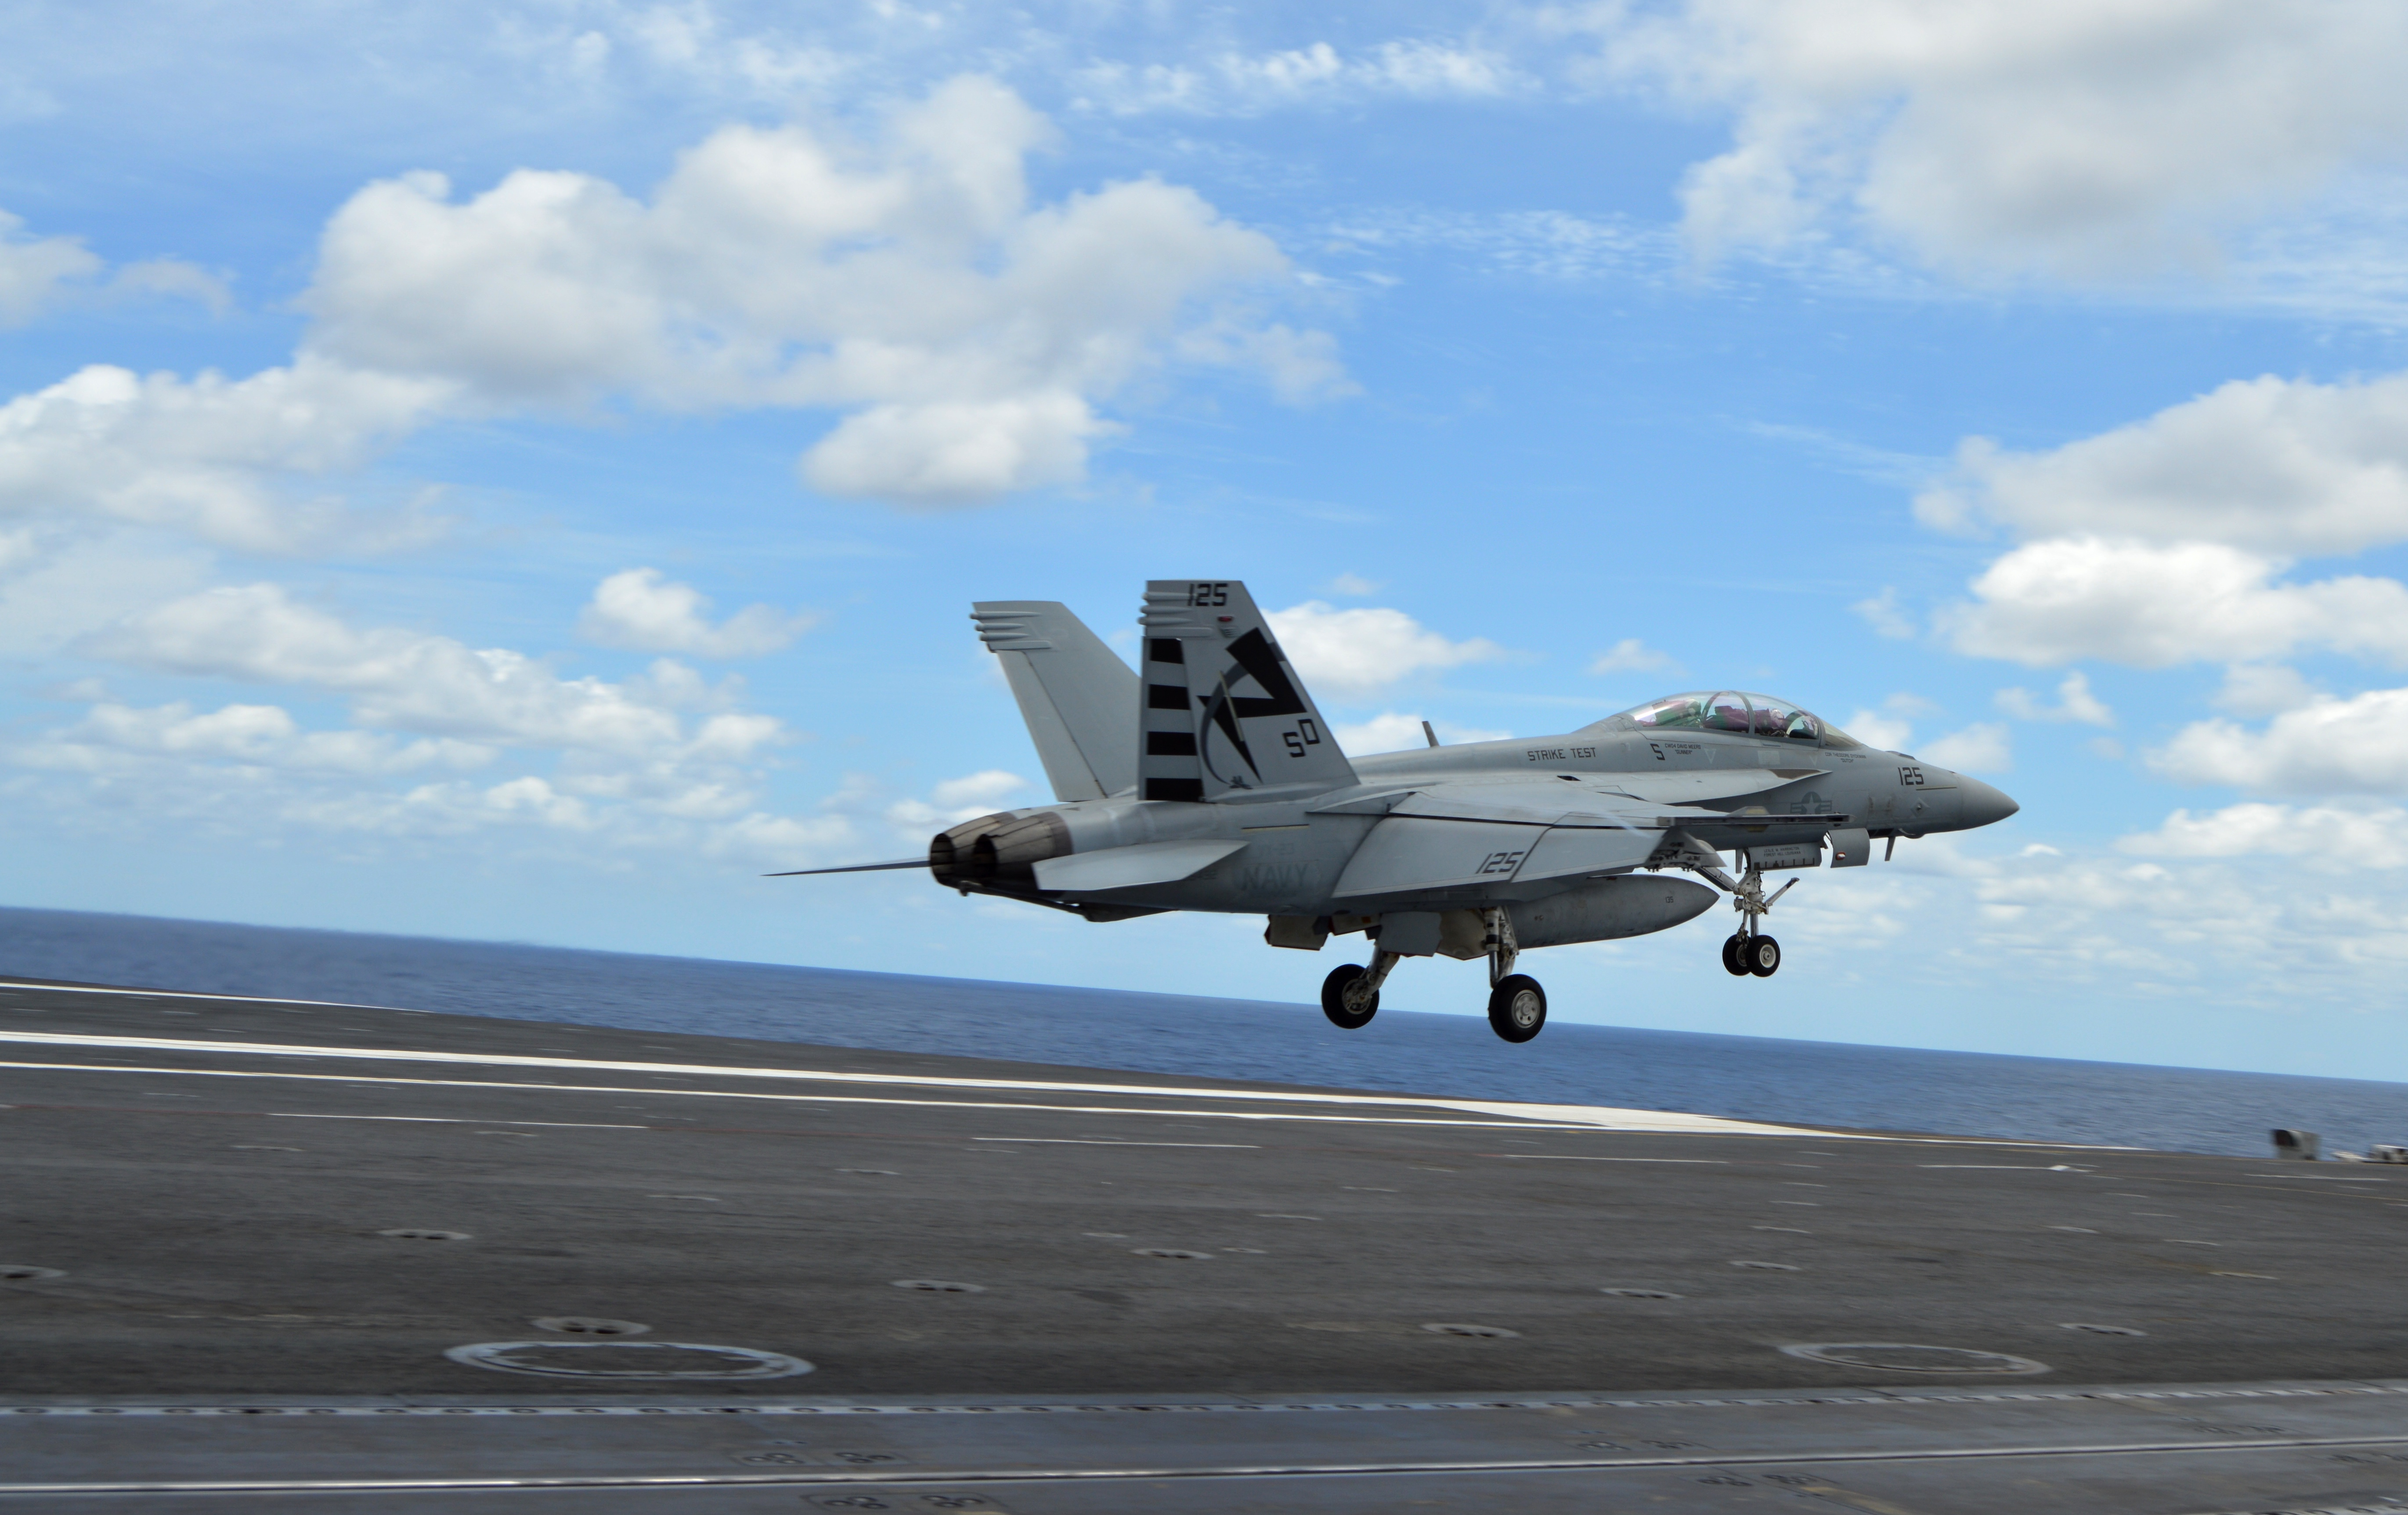 An F/A-18F Super Hornet in Air Test and Evaluation Squadron (VX) 23 conducts touch-and-go flight operations off the deck of USS George Washington (CVN-73) on June 27, 2016, while testing the MAGIC CARPET carrier landing assistance technology. USNI News photo.